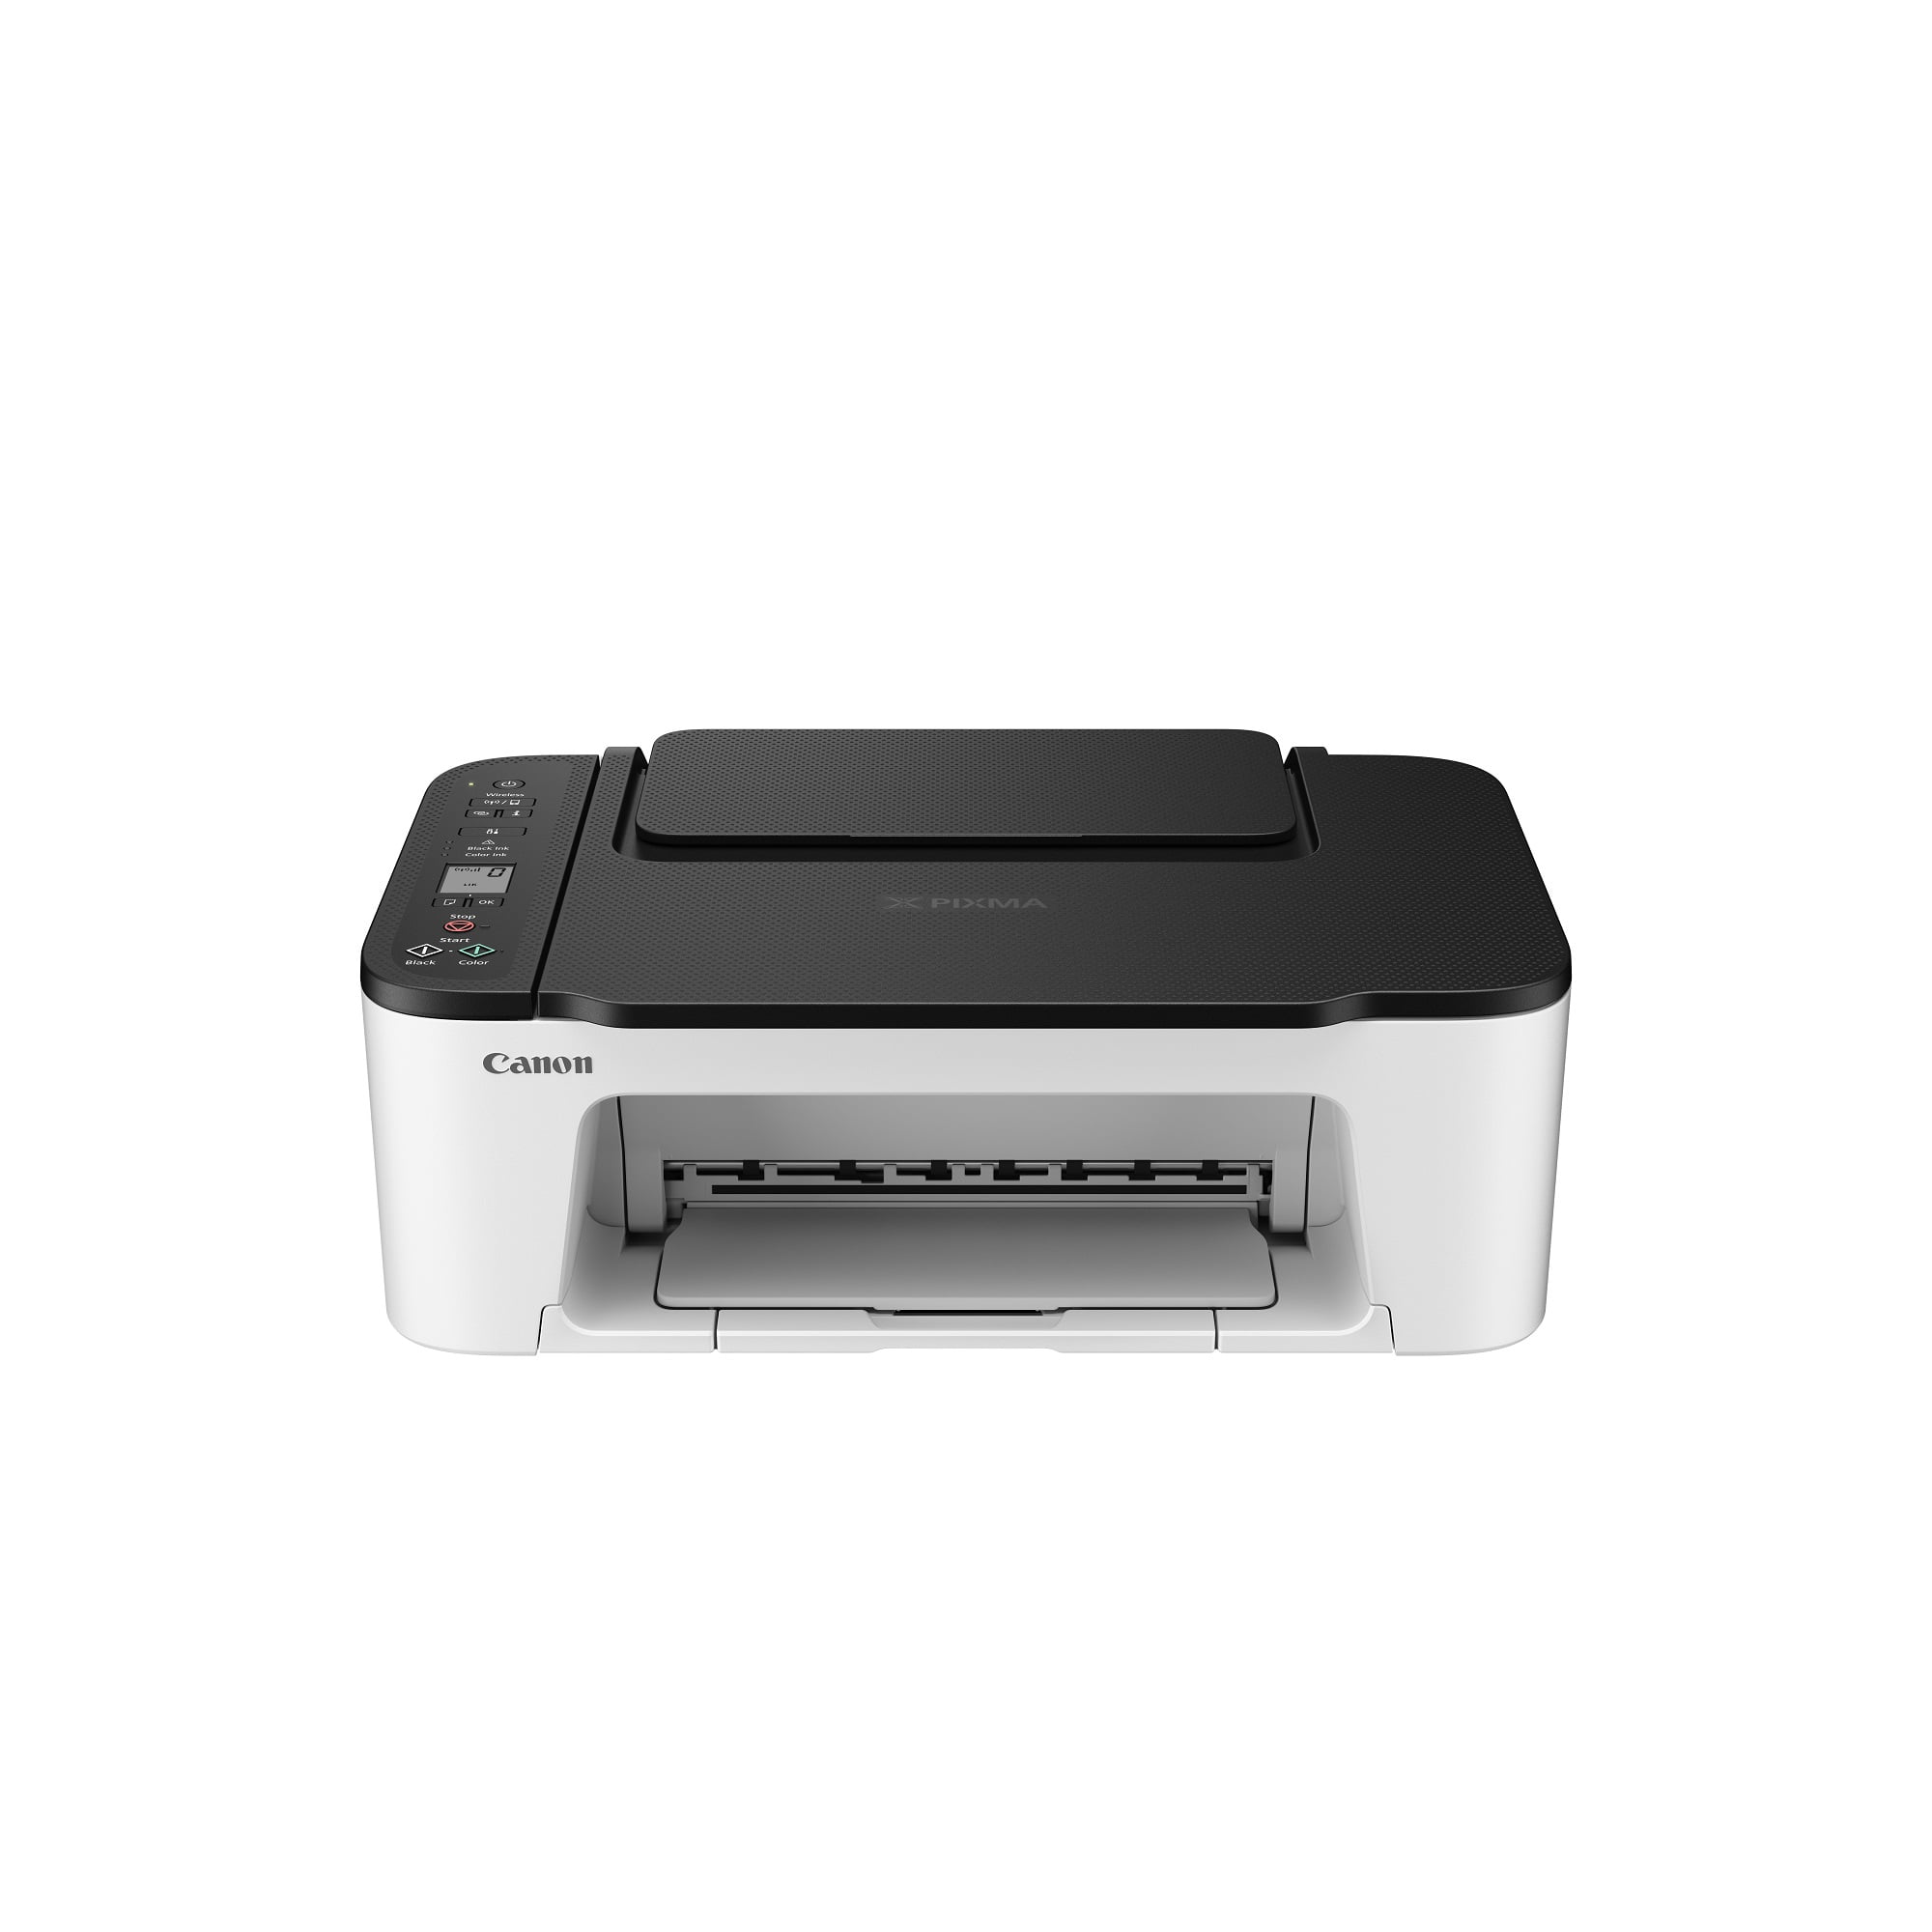 Canon PIXMA TS3522 All-In-One Wireless InkJet Printer With Print, Copy and Scan Features